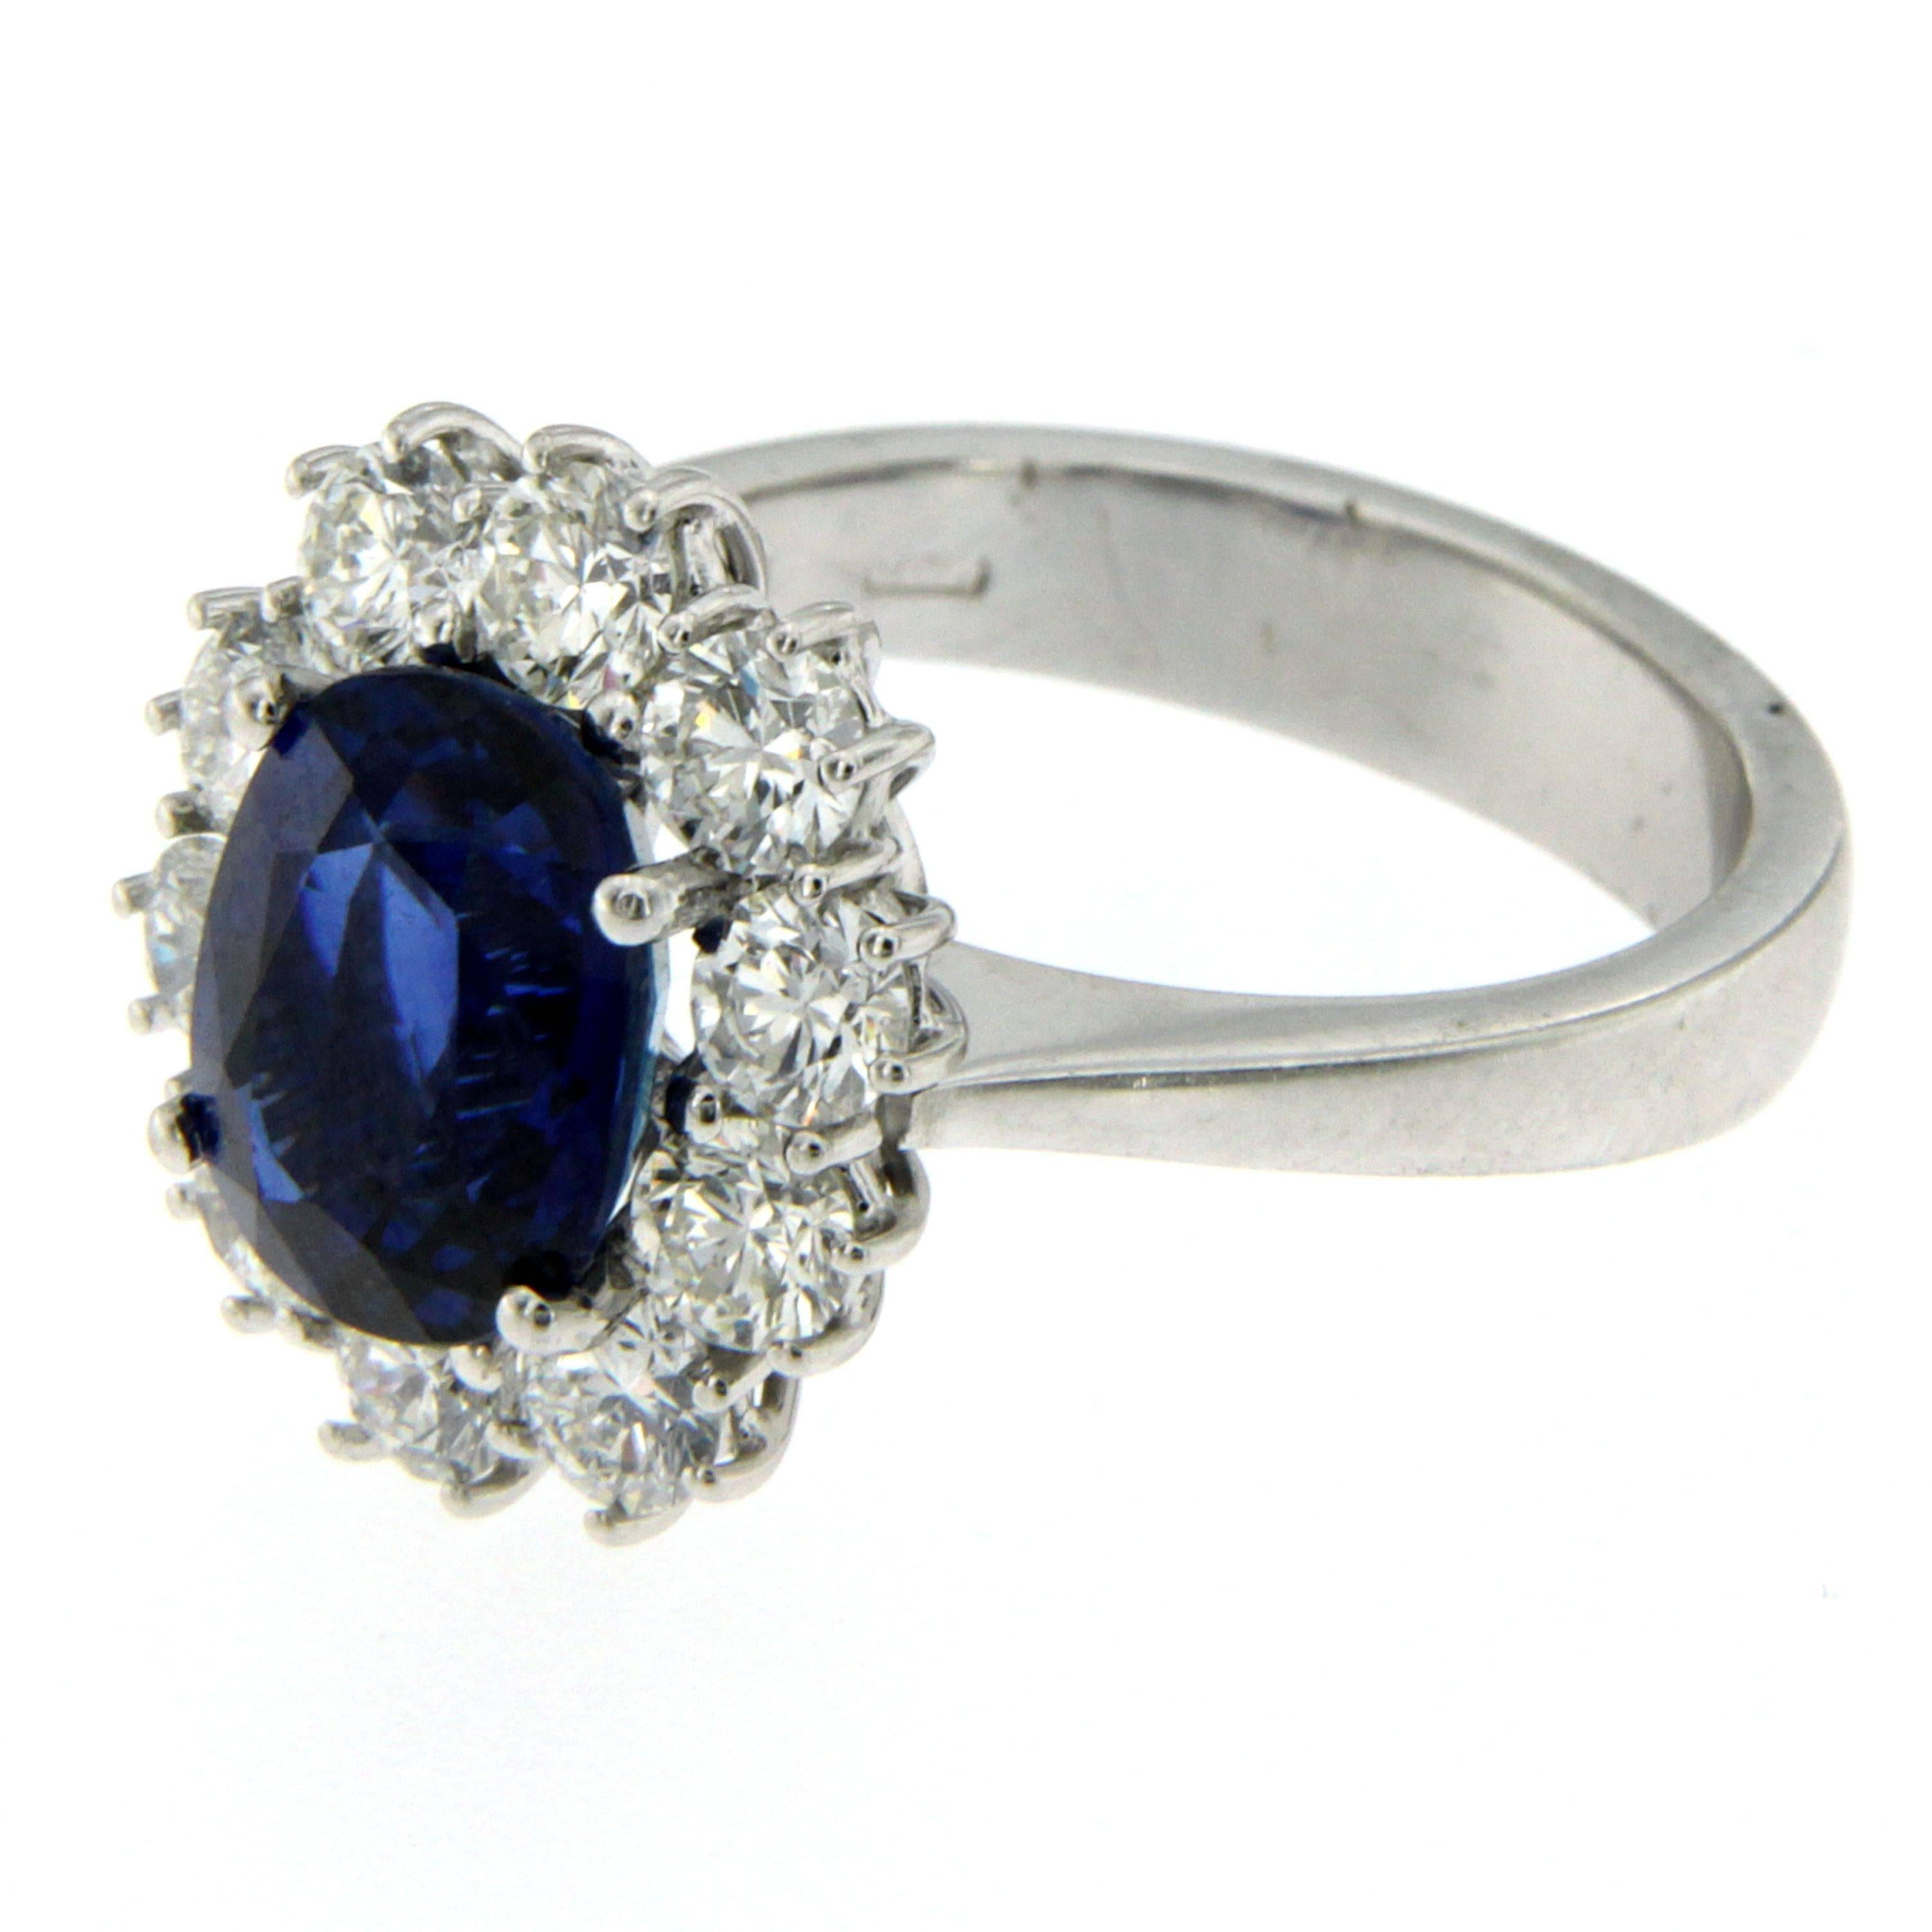 A fine and impressive 18k white Gold, Sapphire and Diamond Ring, set in the center with an oval-cut Burma Sapphire weighing 3.85 carats of extraordinary color and clarity, flanked by 10 round cut diamonds weighing 1.50 carats, clarity VvS - Color G.